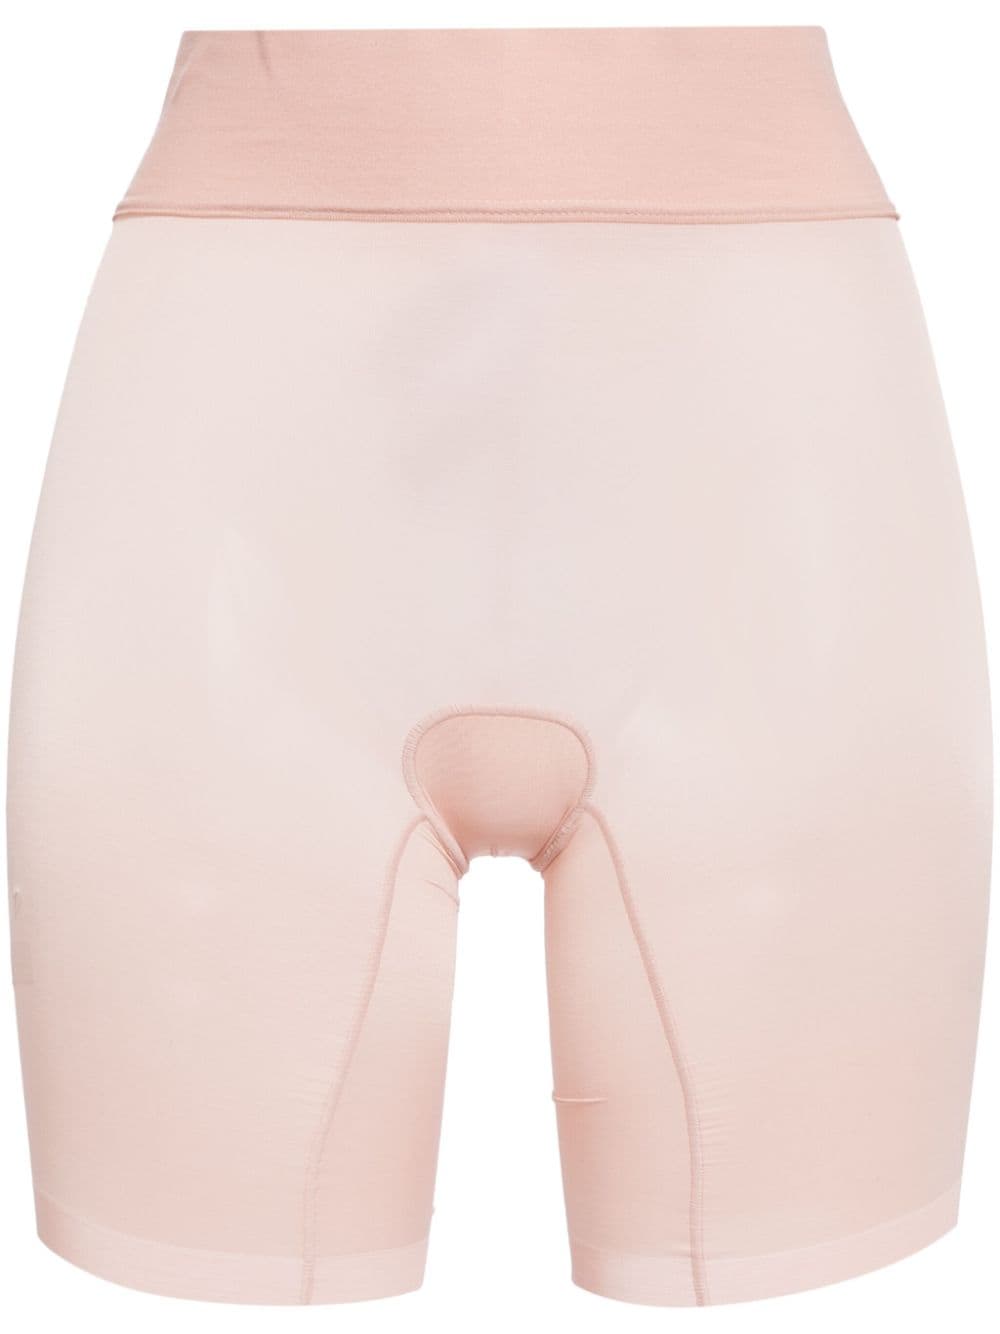 Wolford sheer touch control shorts - Pink von Wolford